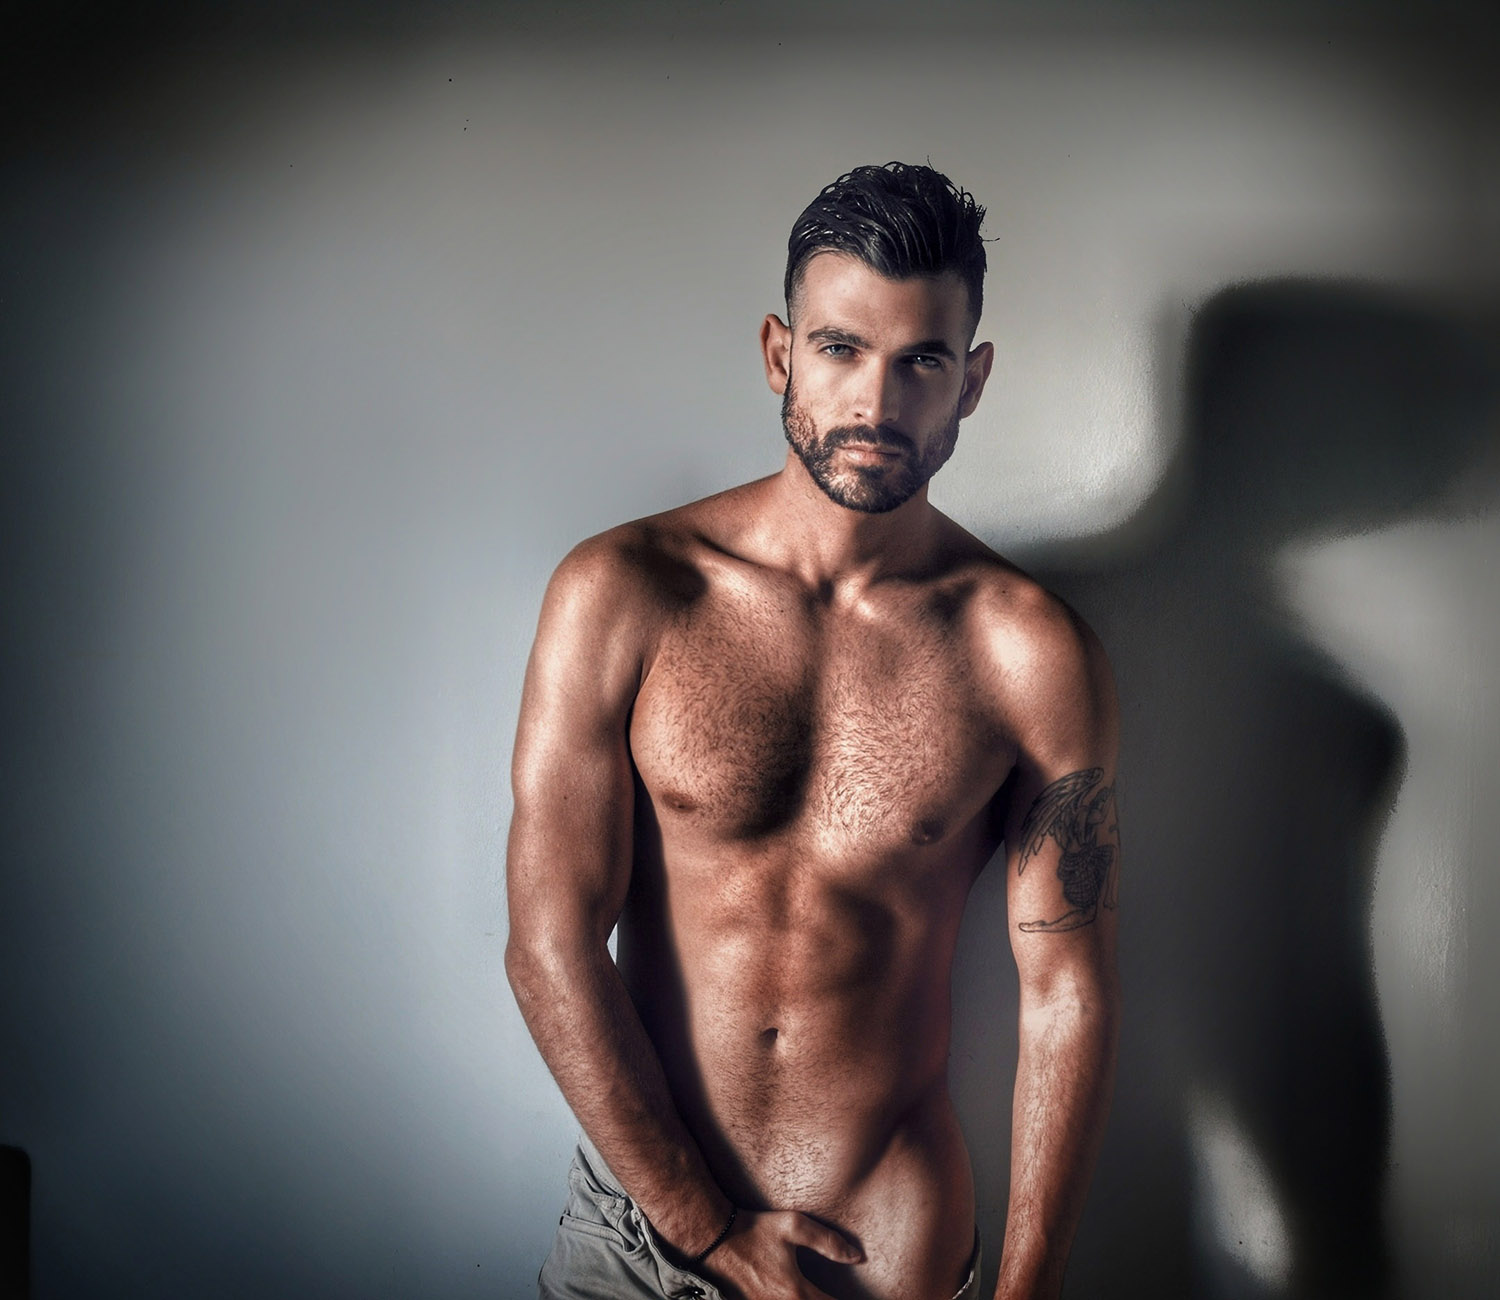 – EXCLUSIVE – Bill Aggelopoulos by anonymous photographer.